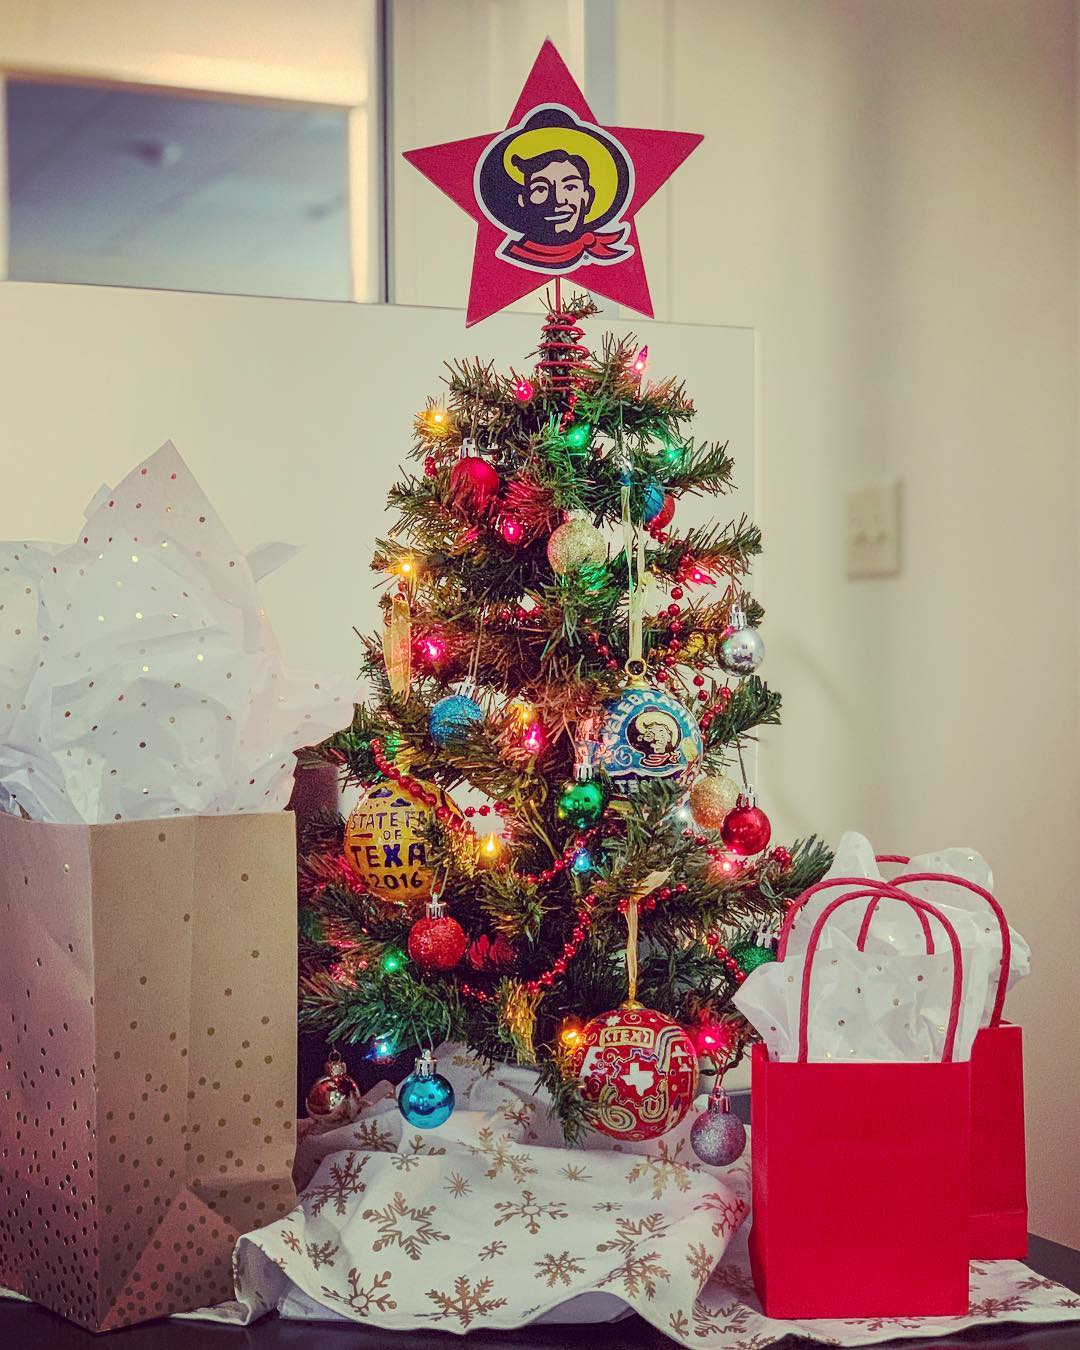 Anyone else have @statefairoftx holiday decorations? 😁🤠 Share your State Fair Spirit 👉🏽 #BigTex